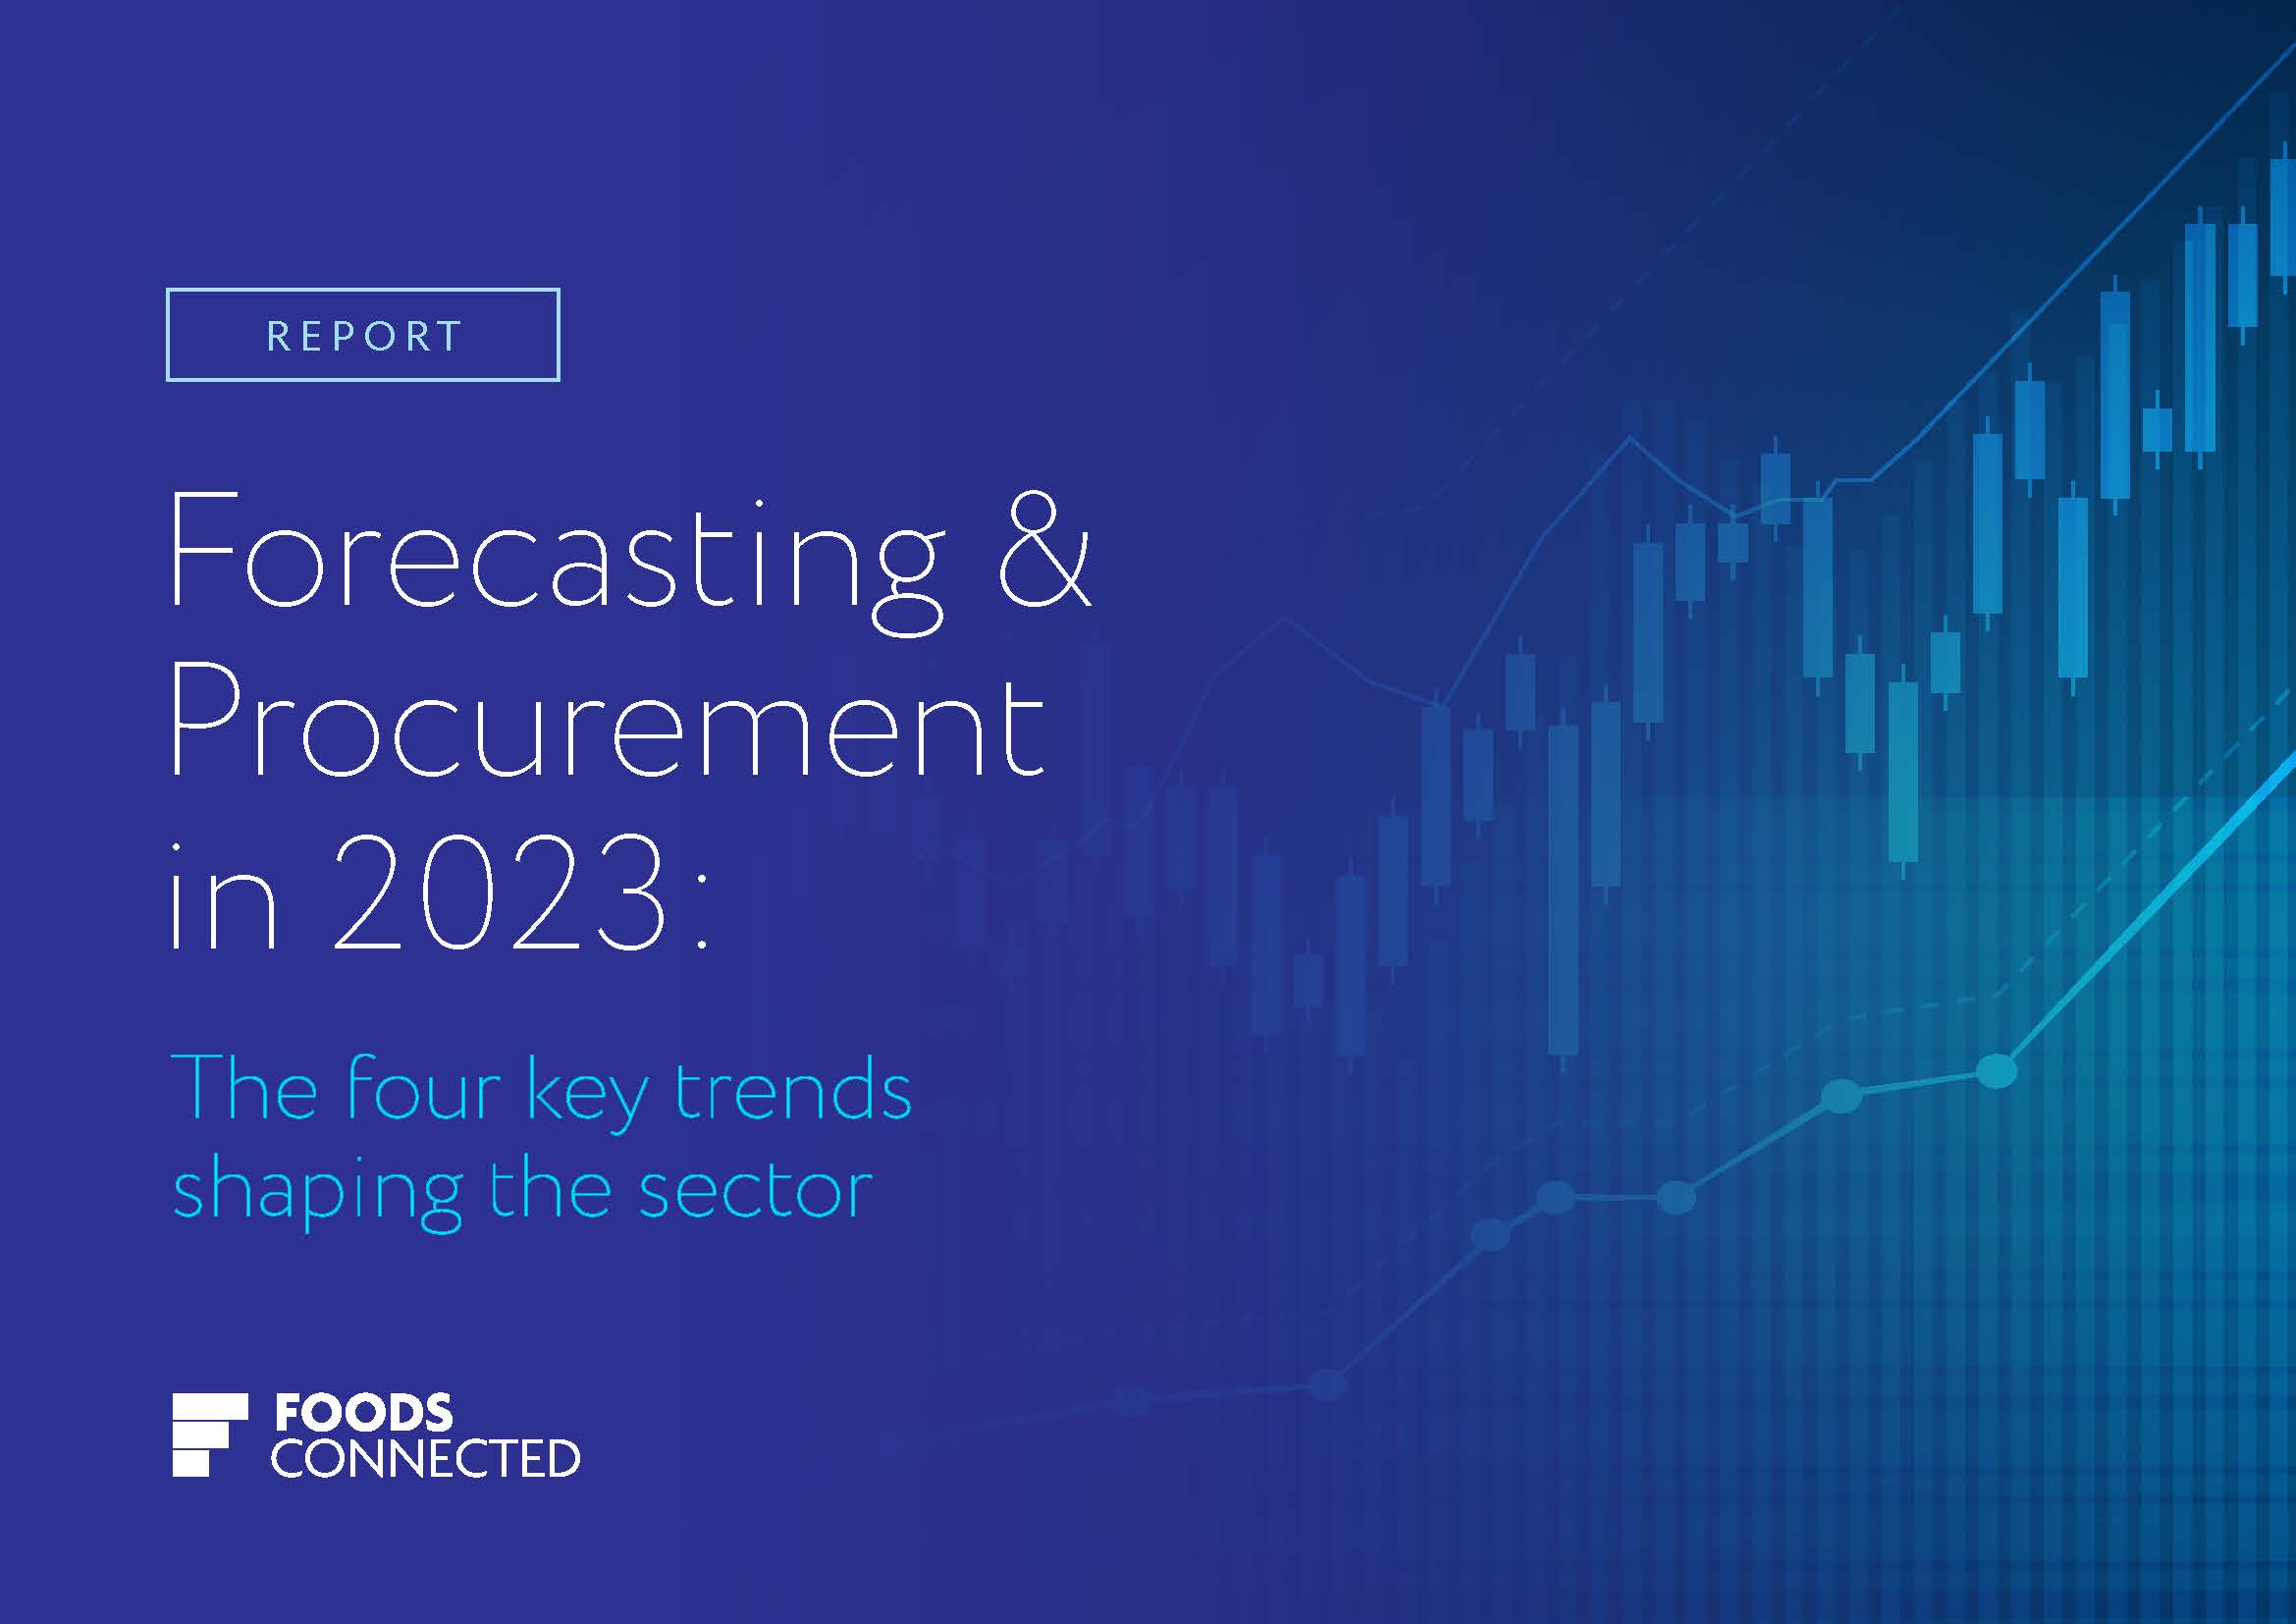 Forecasting & Procurement in 2023 Report cover